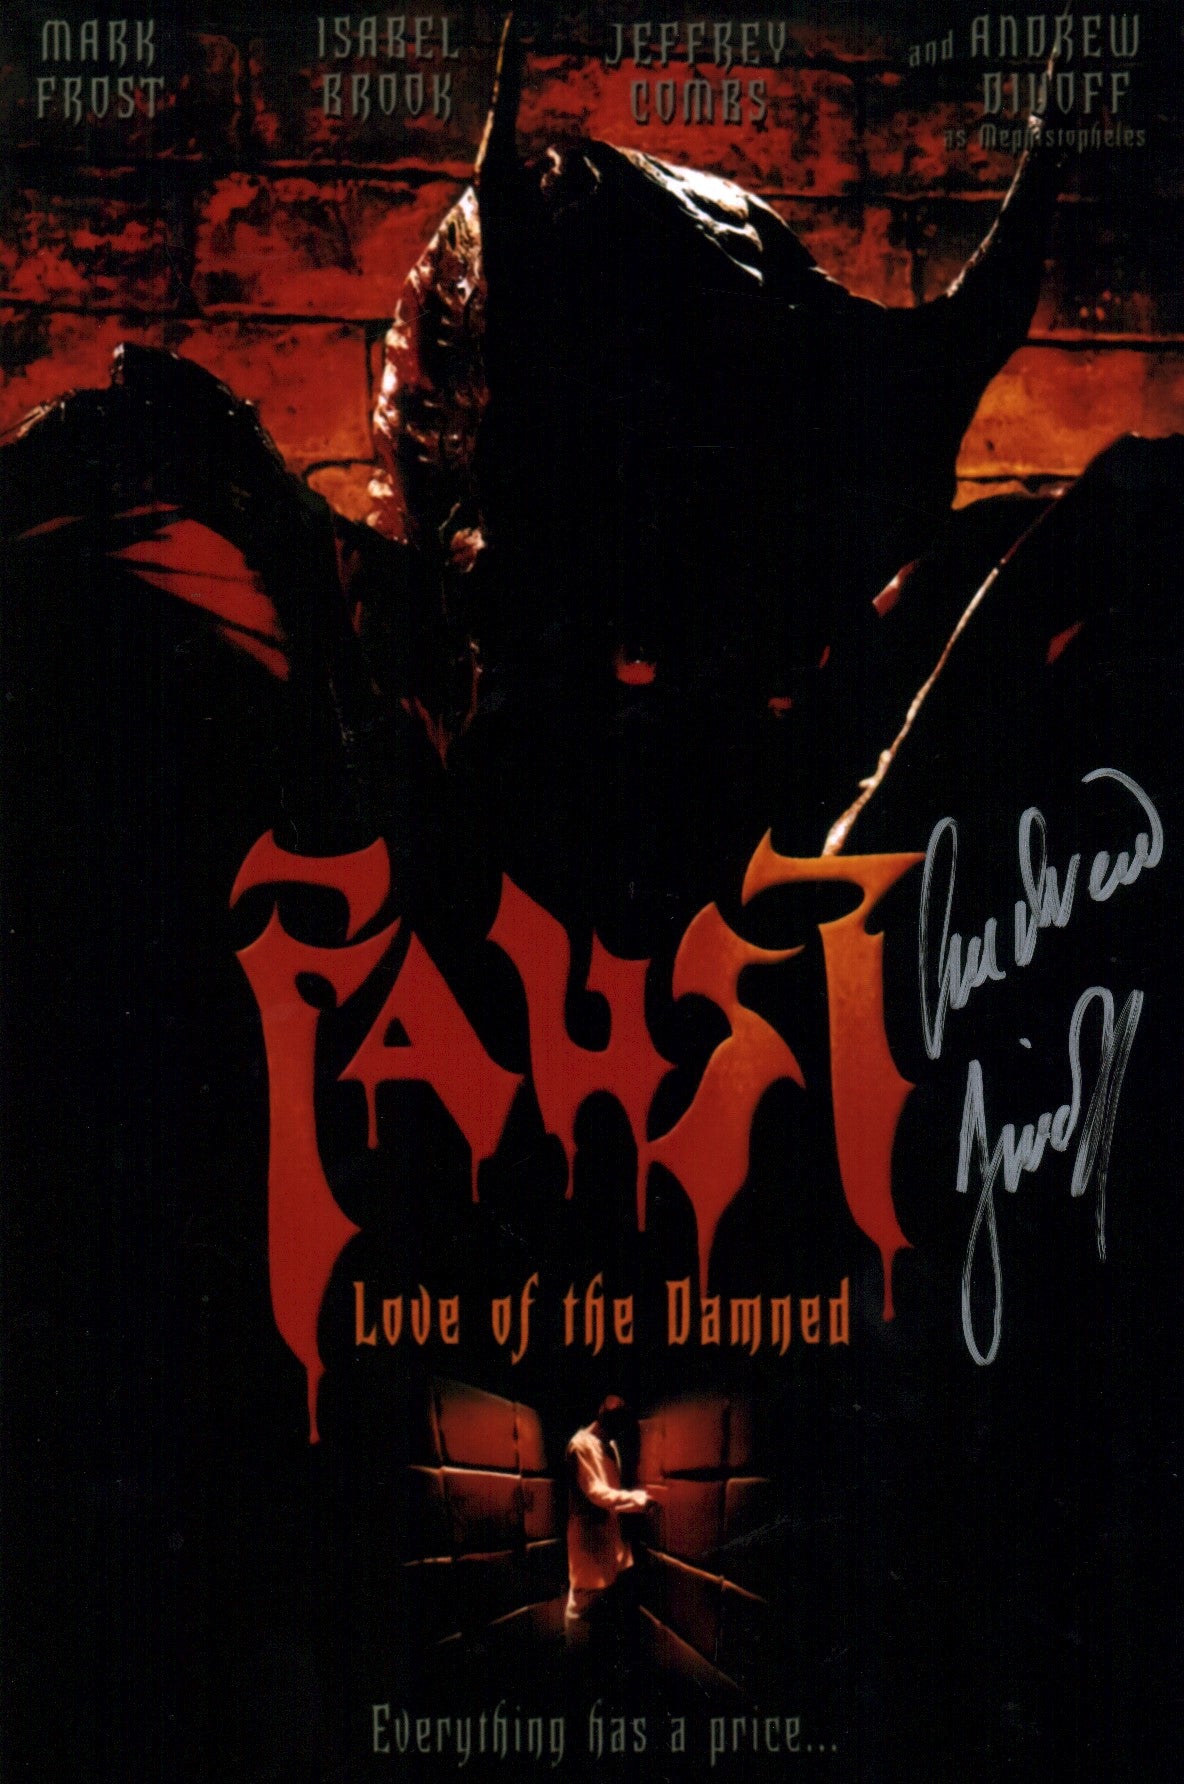 Andrew Divoff Faust: Love of the Damned 8x12 Signed Photo Poster JSA COA Certified Autograph